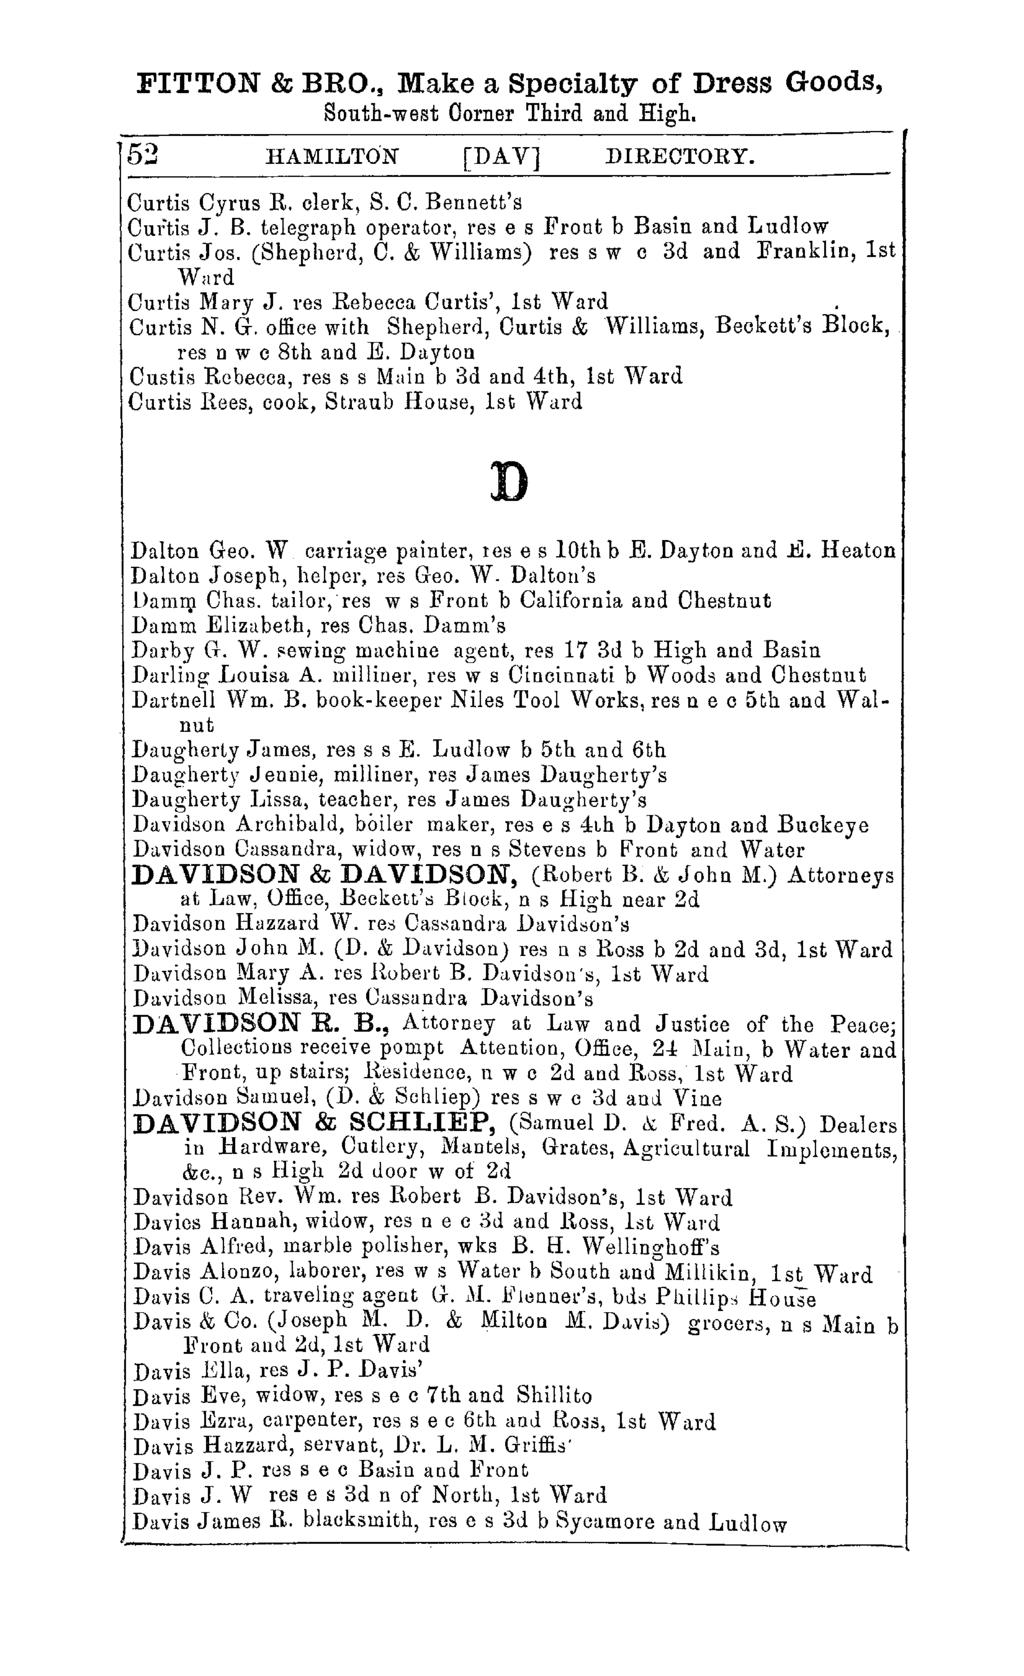 FITTON & BRO.! Make a Specialty of Dress Goods, South-west Oorner Third and High. HAMILTON [DAV] DIRECTORY. Curtis Cyrus R. clerk, S. C. Bennett's Curtis J. B. telegraph operator, res e s Front b Basin and Ludlow CurtiR J os.